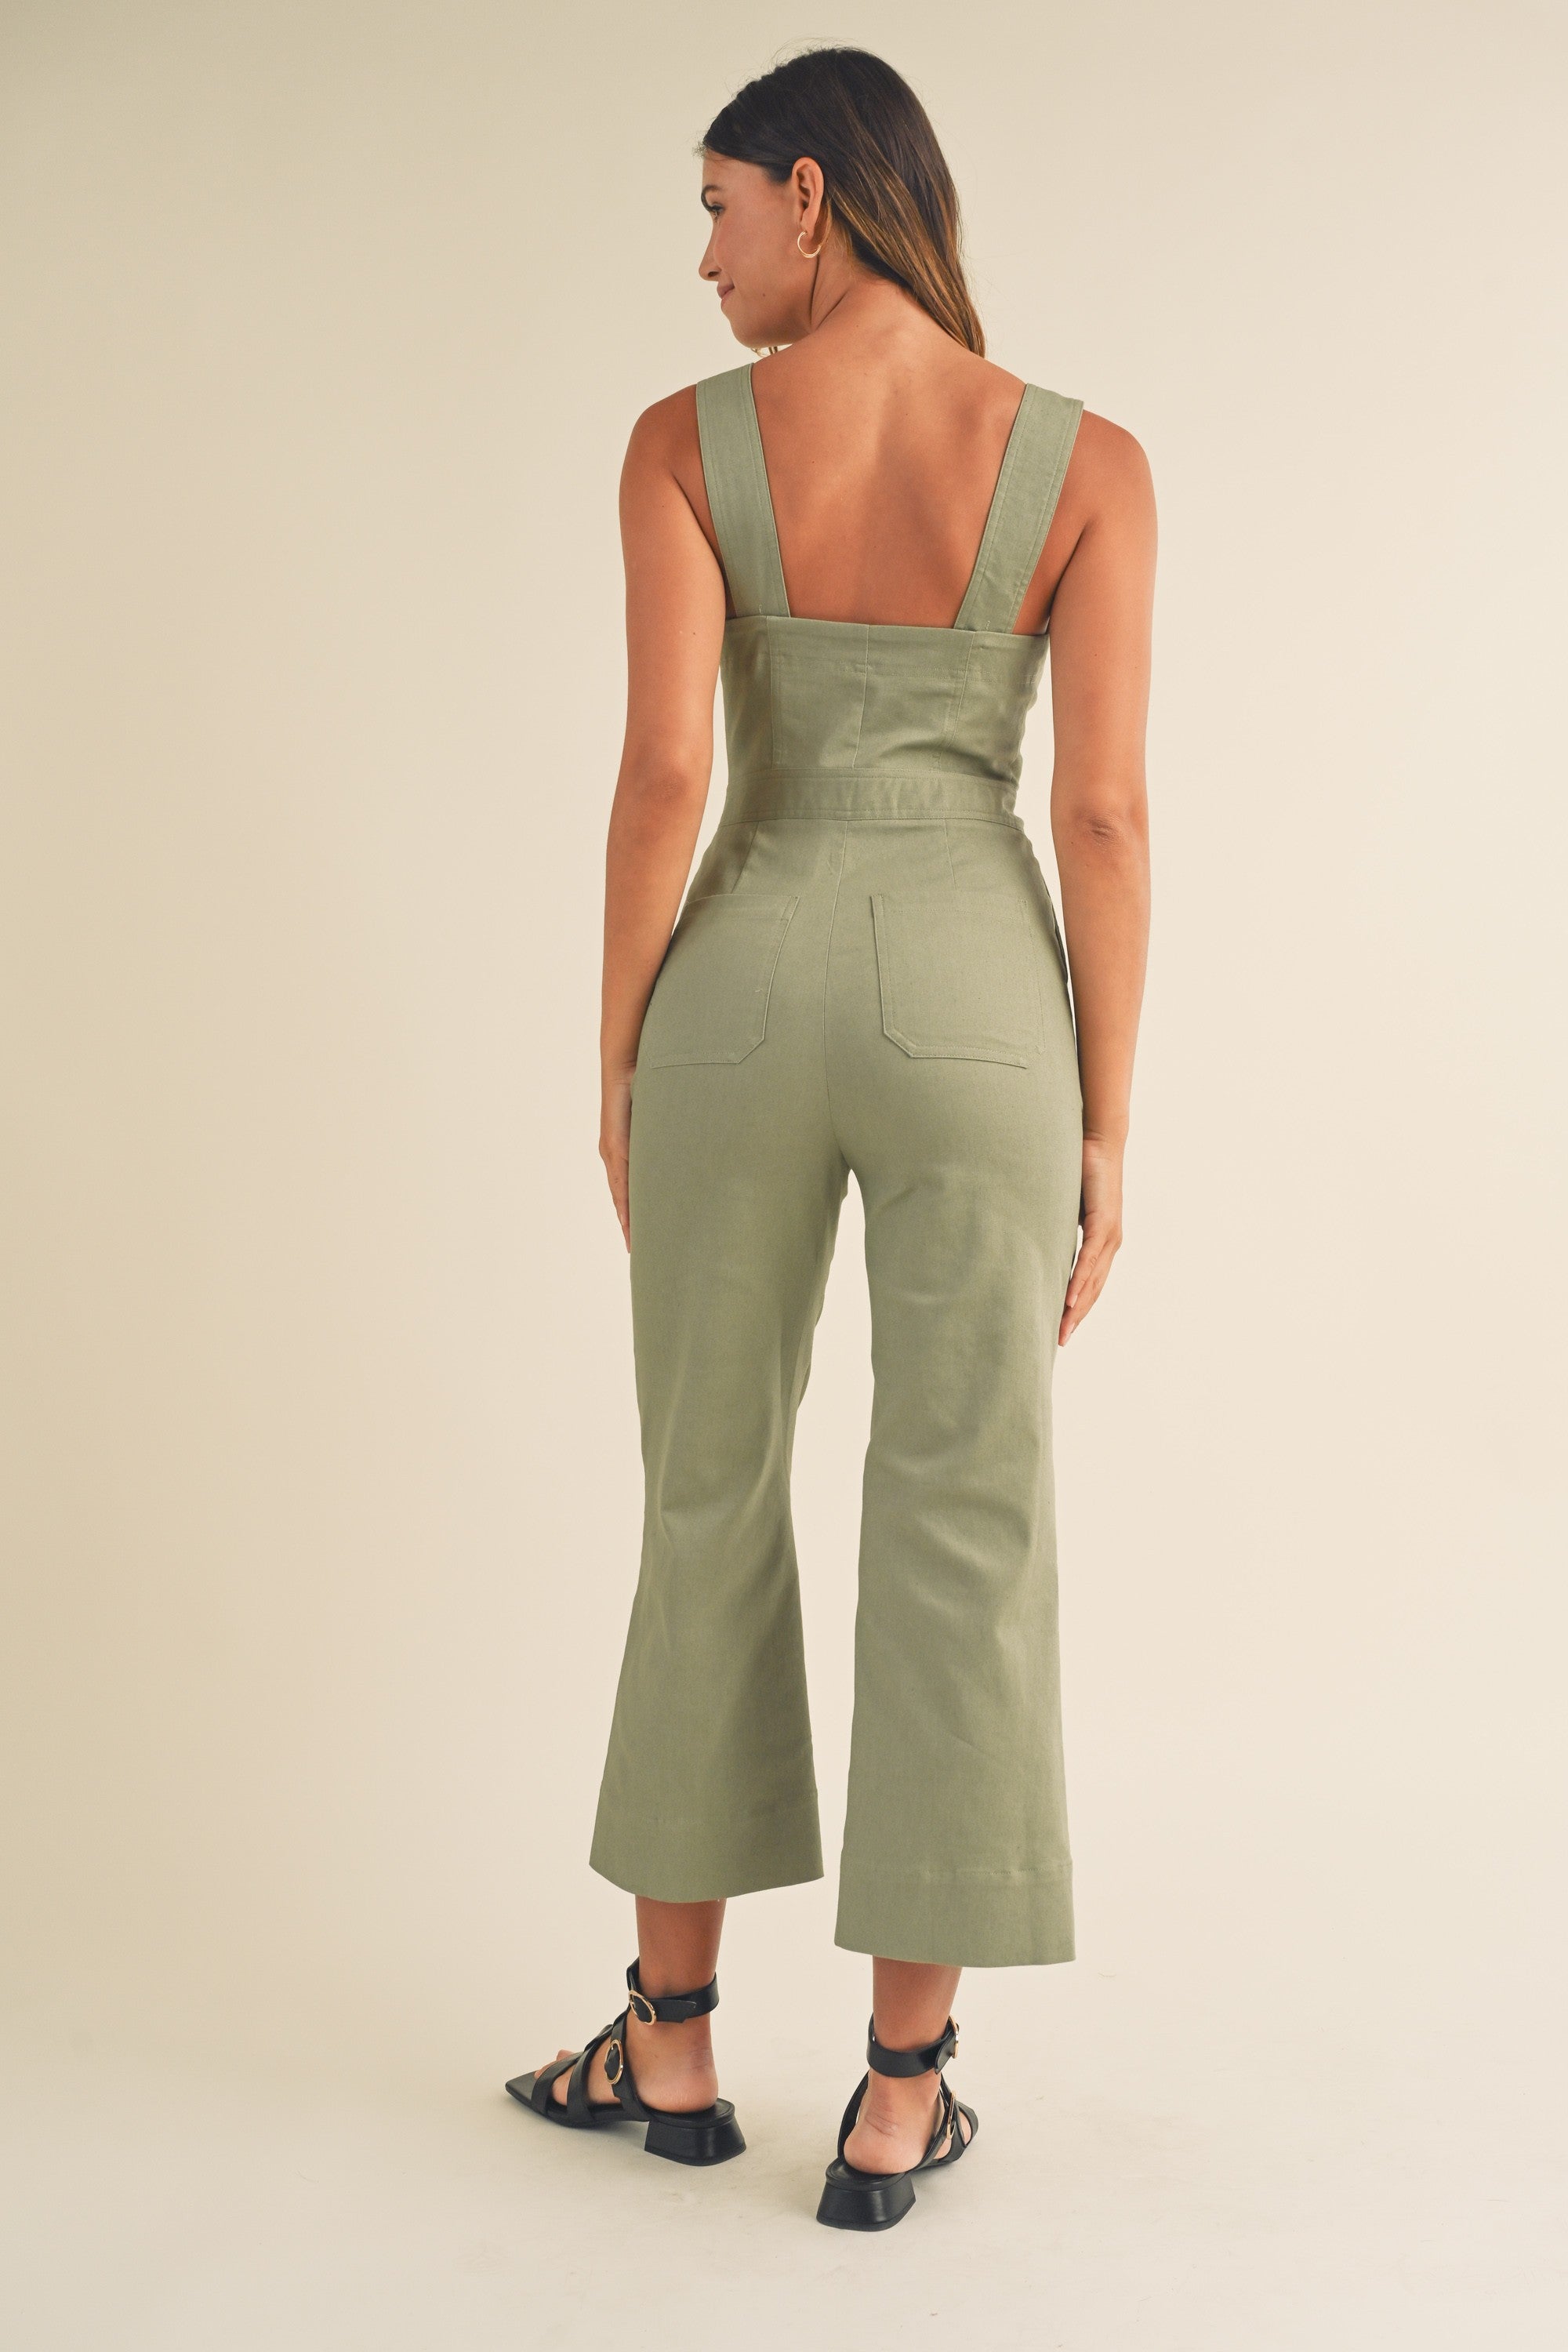 Mable | Square Neckline Cropped Jumpsuit | Sweetest Stitch Online